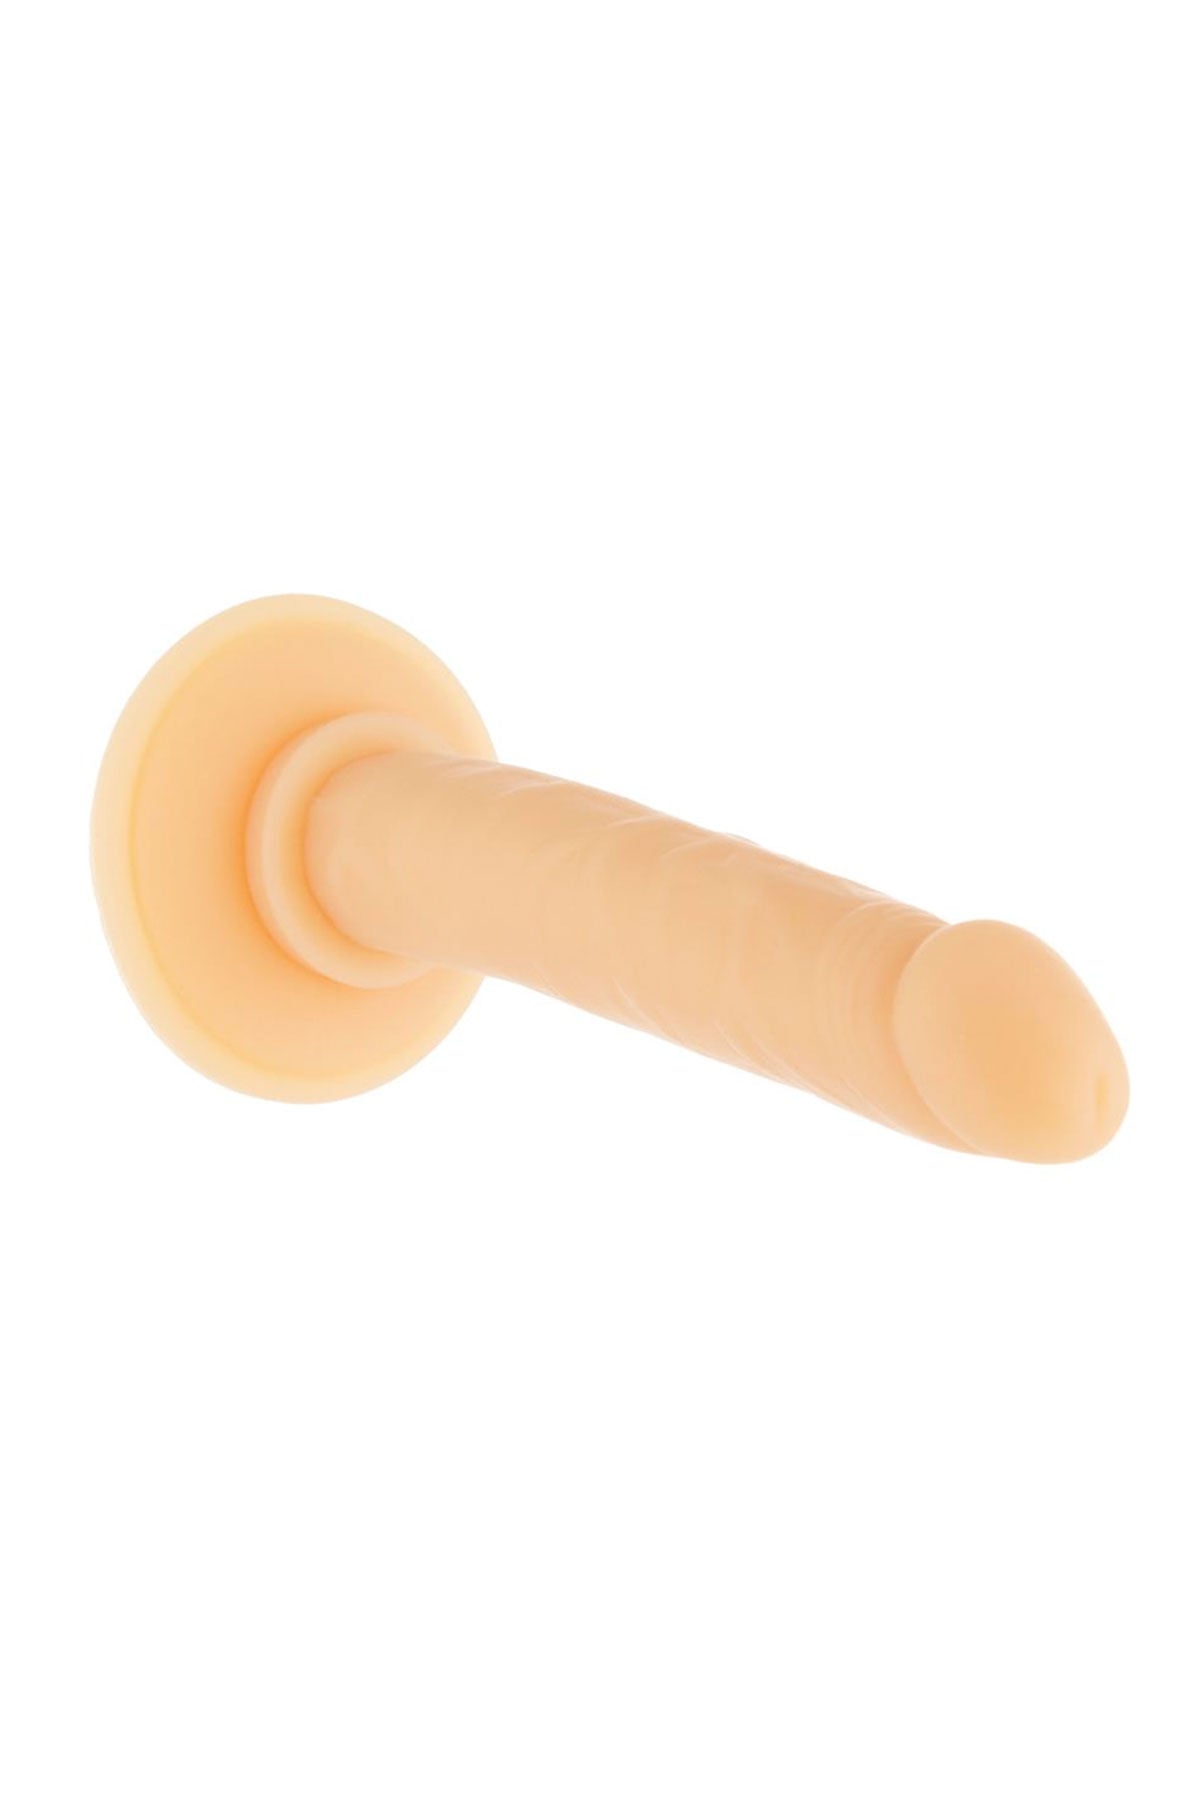 The Tino Suction Cup Dildo by Swan Addition